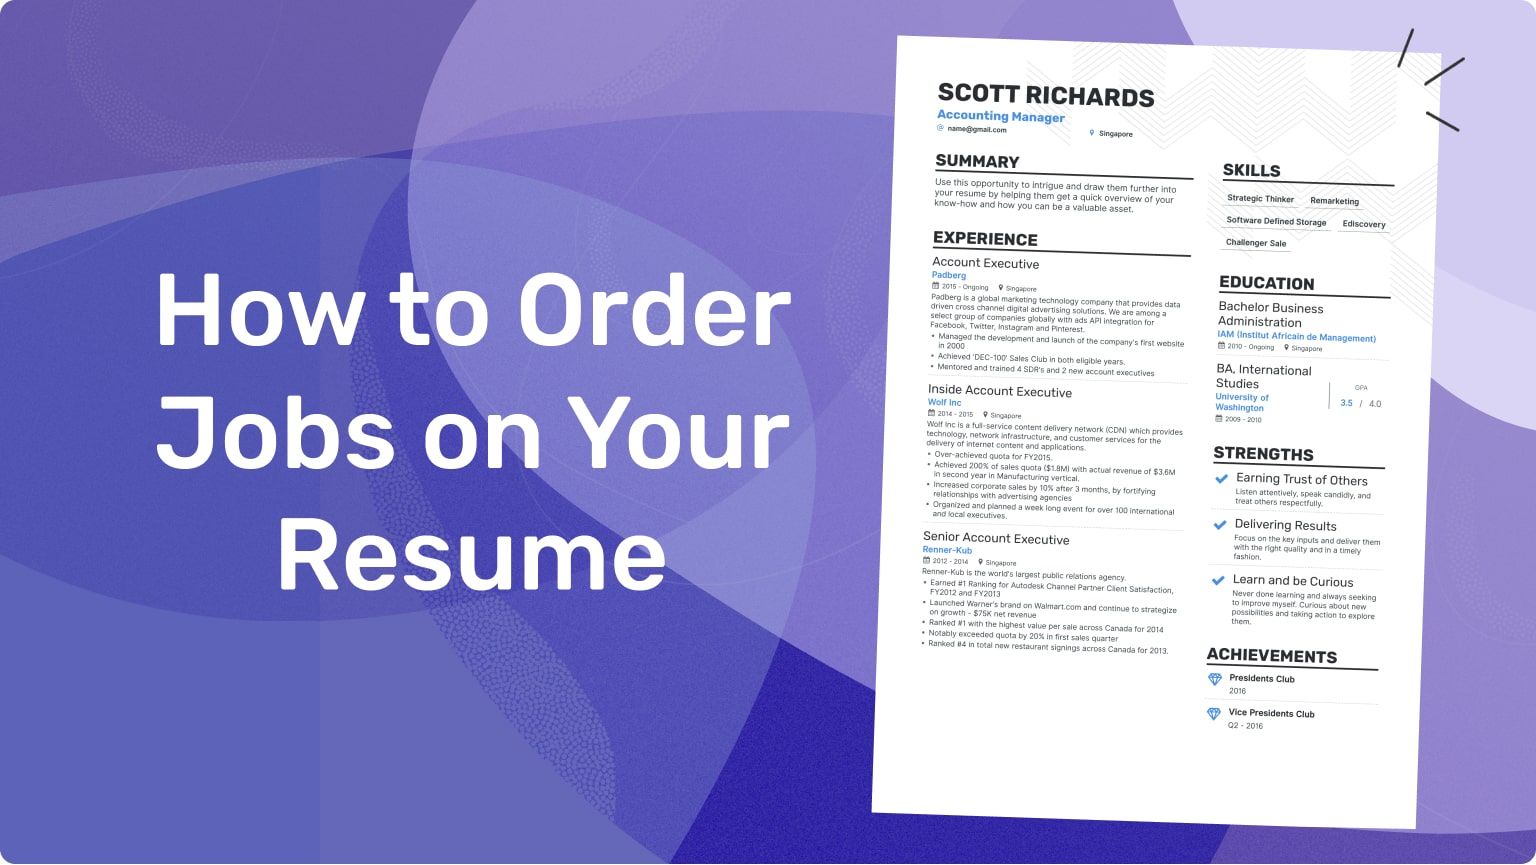 Resume Order of Jobs – How Do You Structure It? | Enhancv